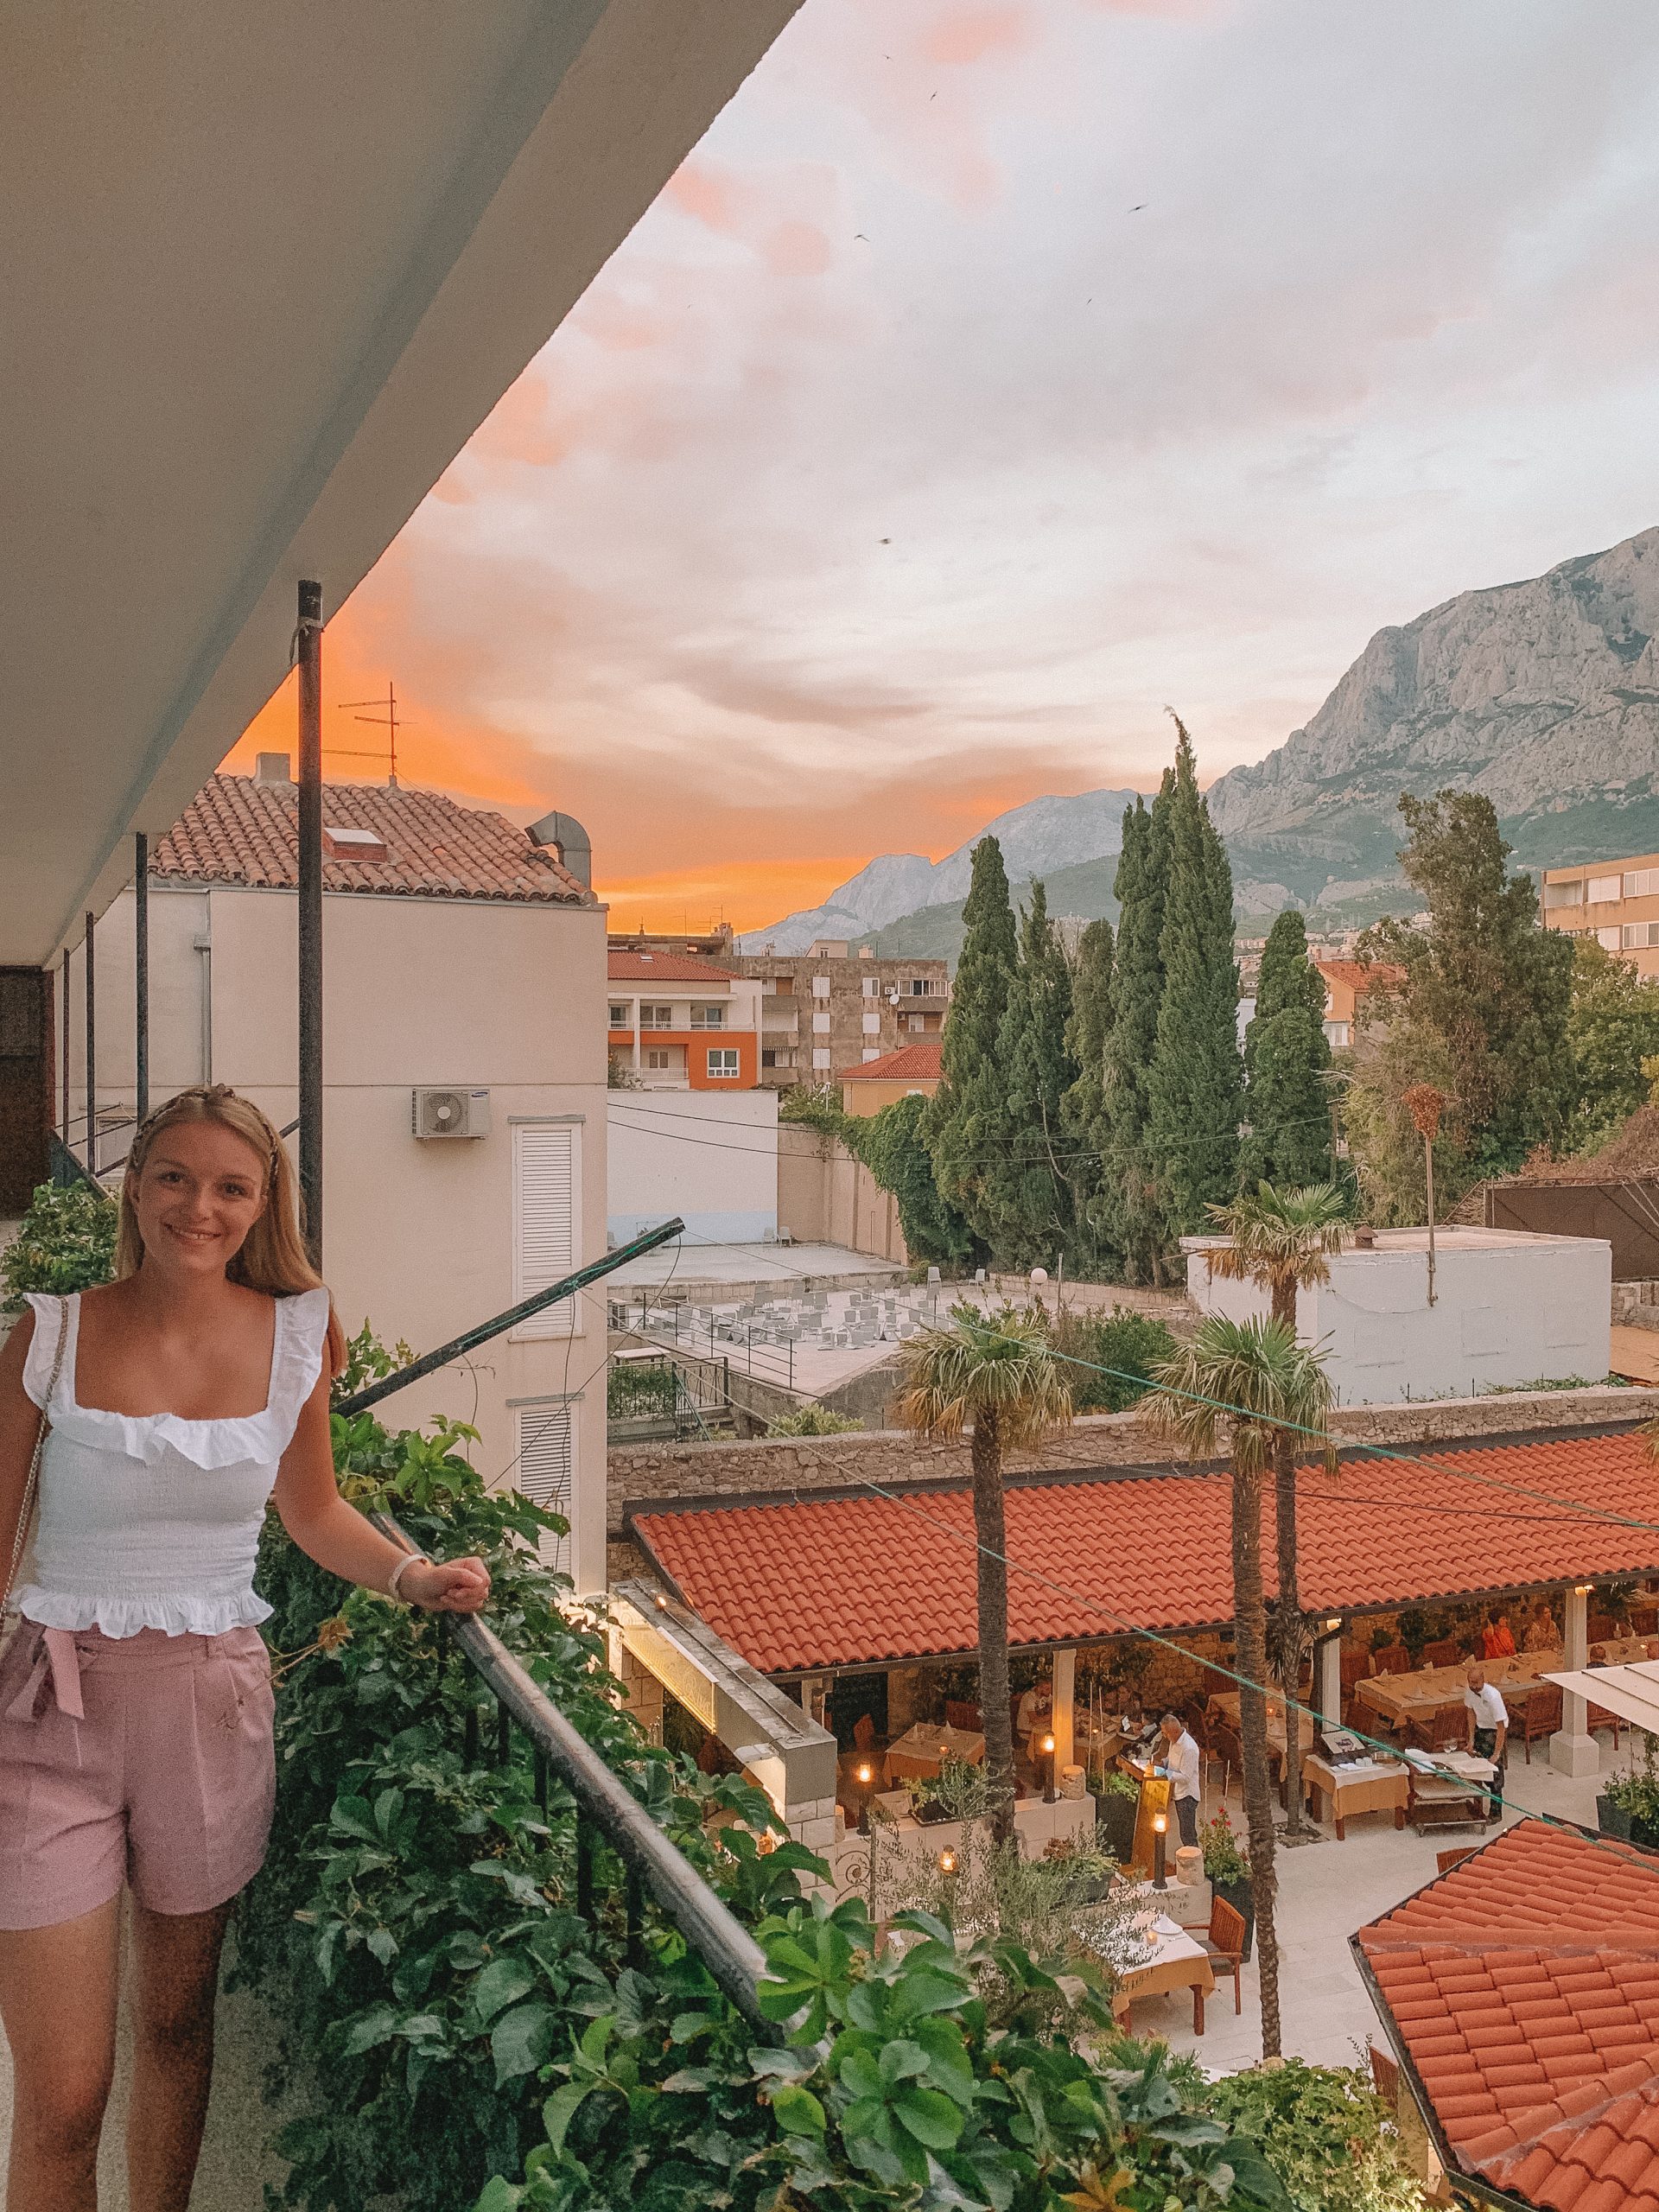 A woman stood on her balcony with the sunsetting over the mountains